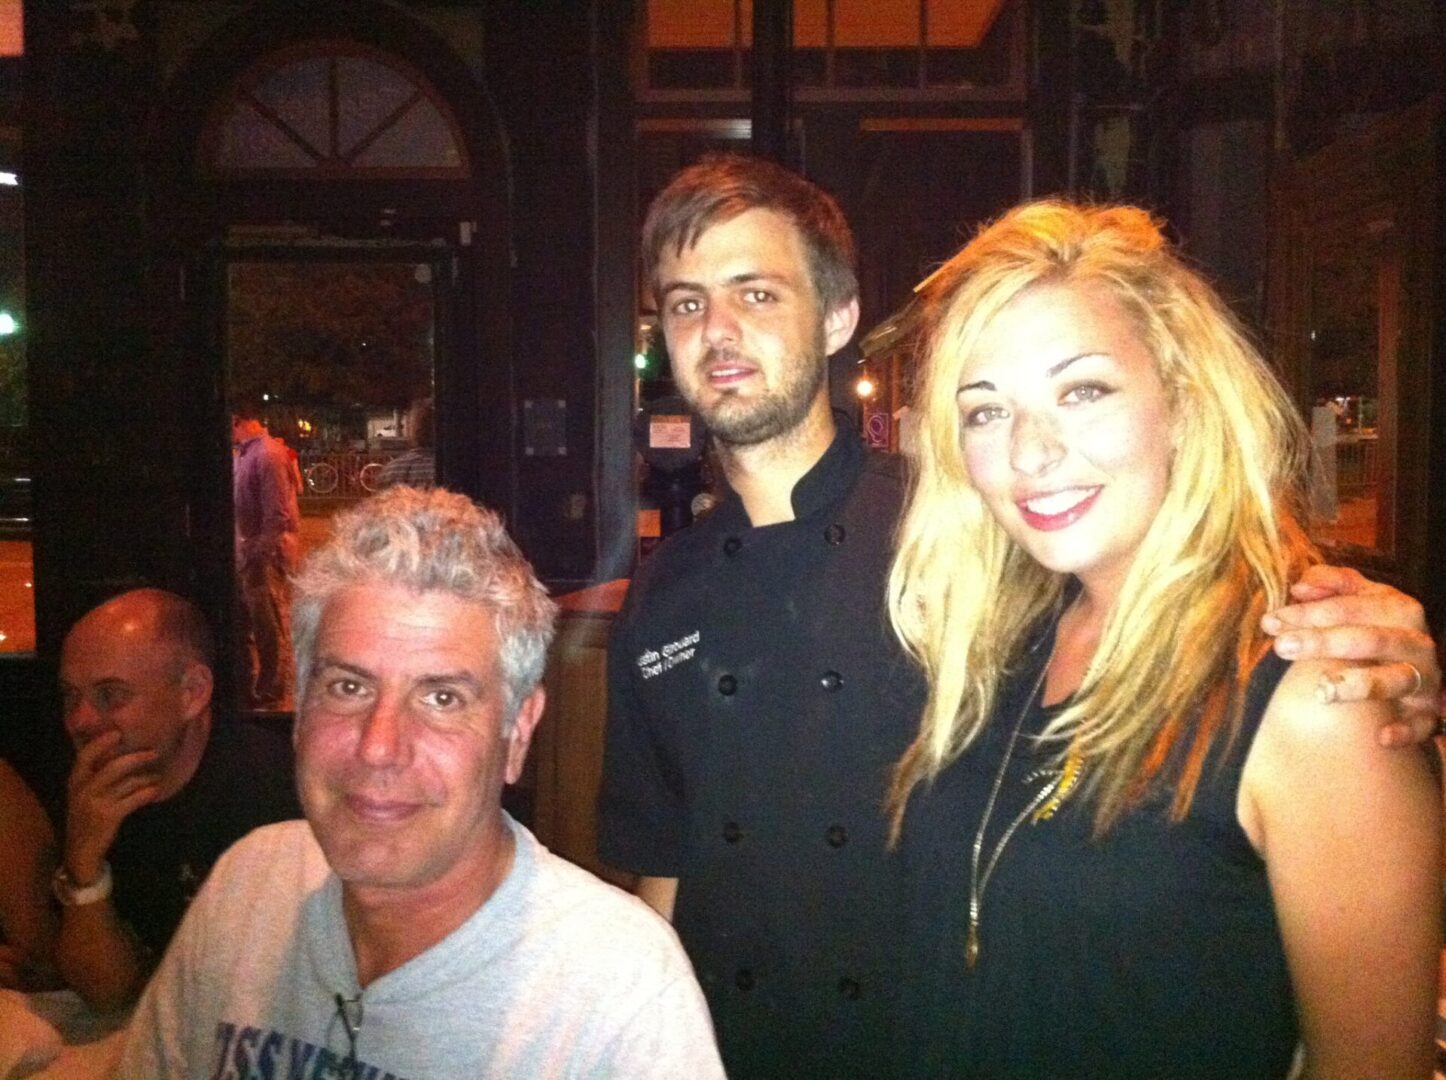 A man and woman posing with Anthony Bourdain